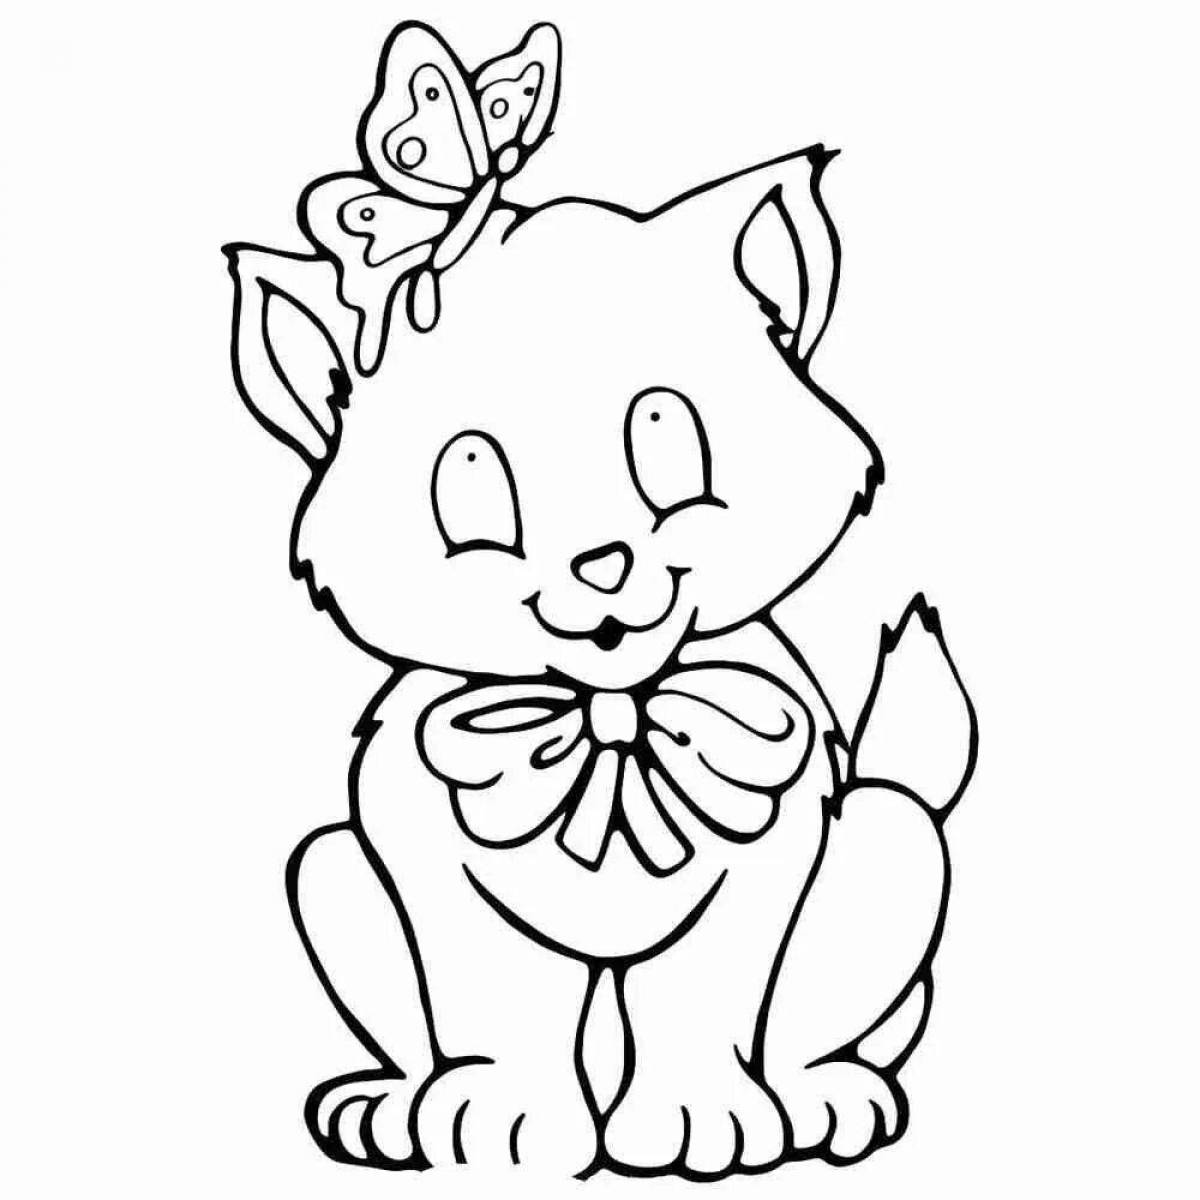 Colored children's printable coloring book